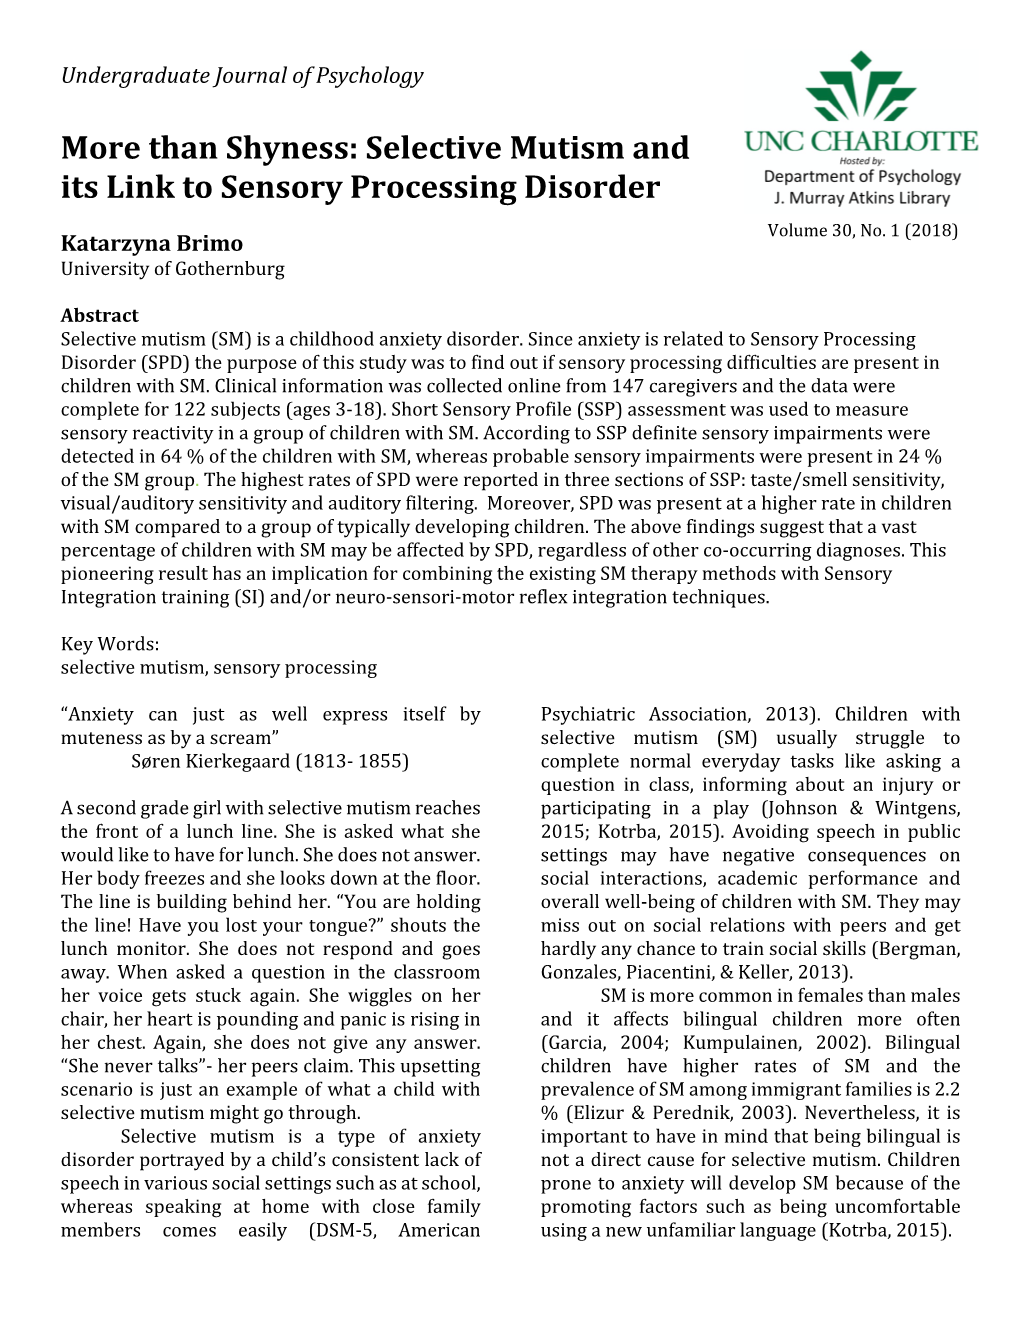 Selective Mutism and Its Link to Sensory Processing Disorder